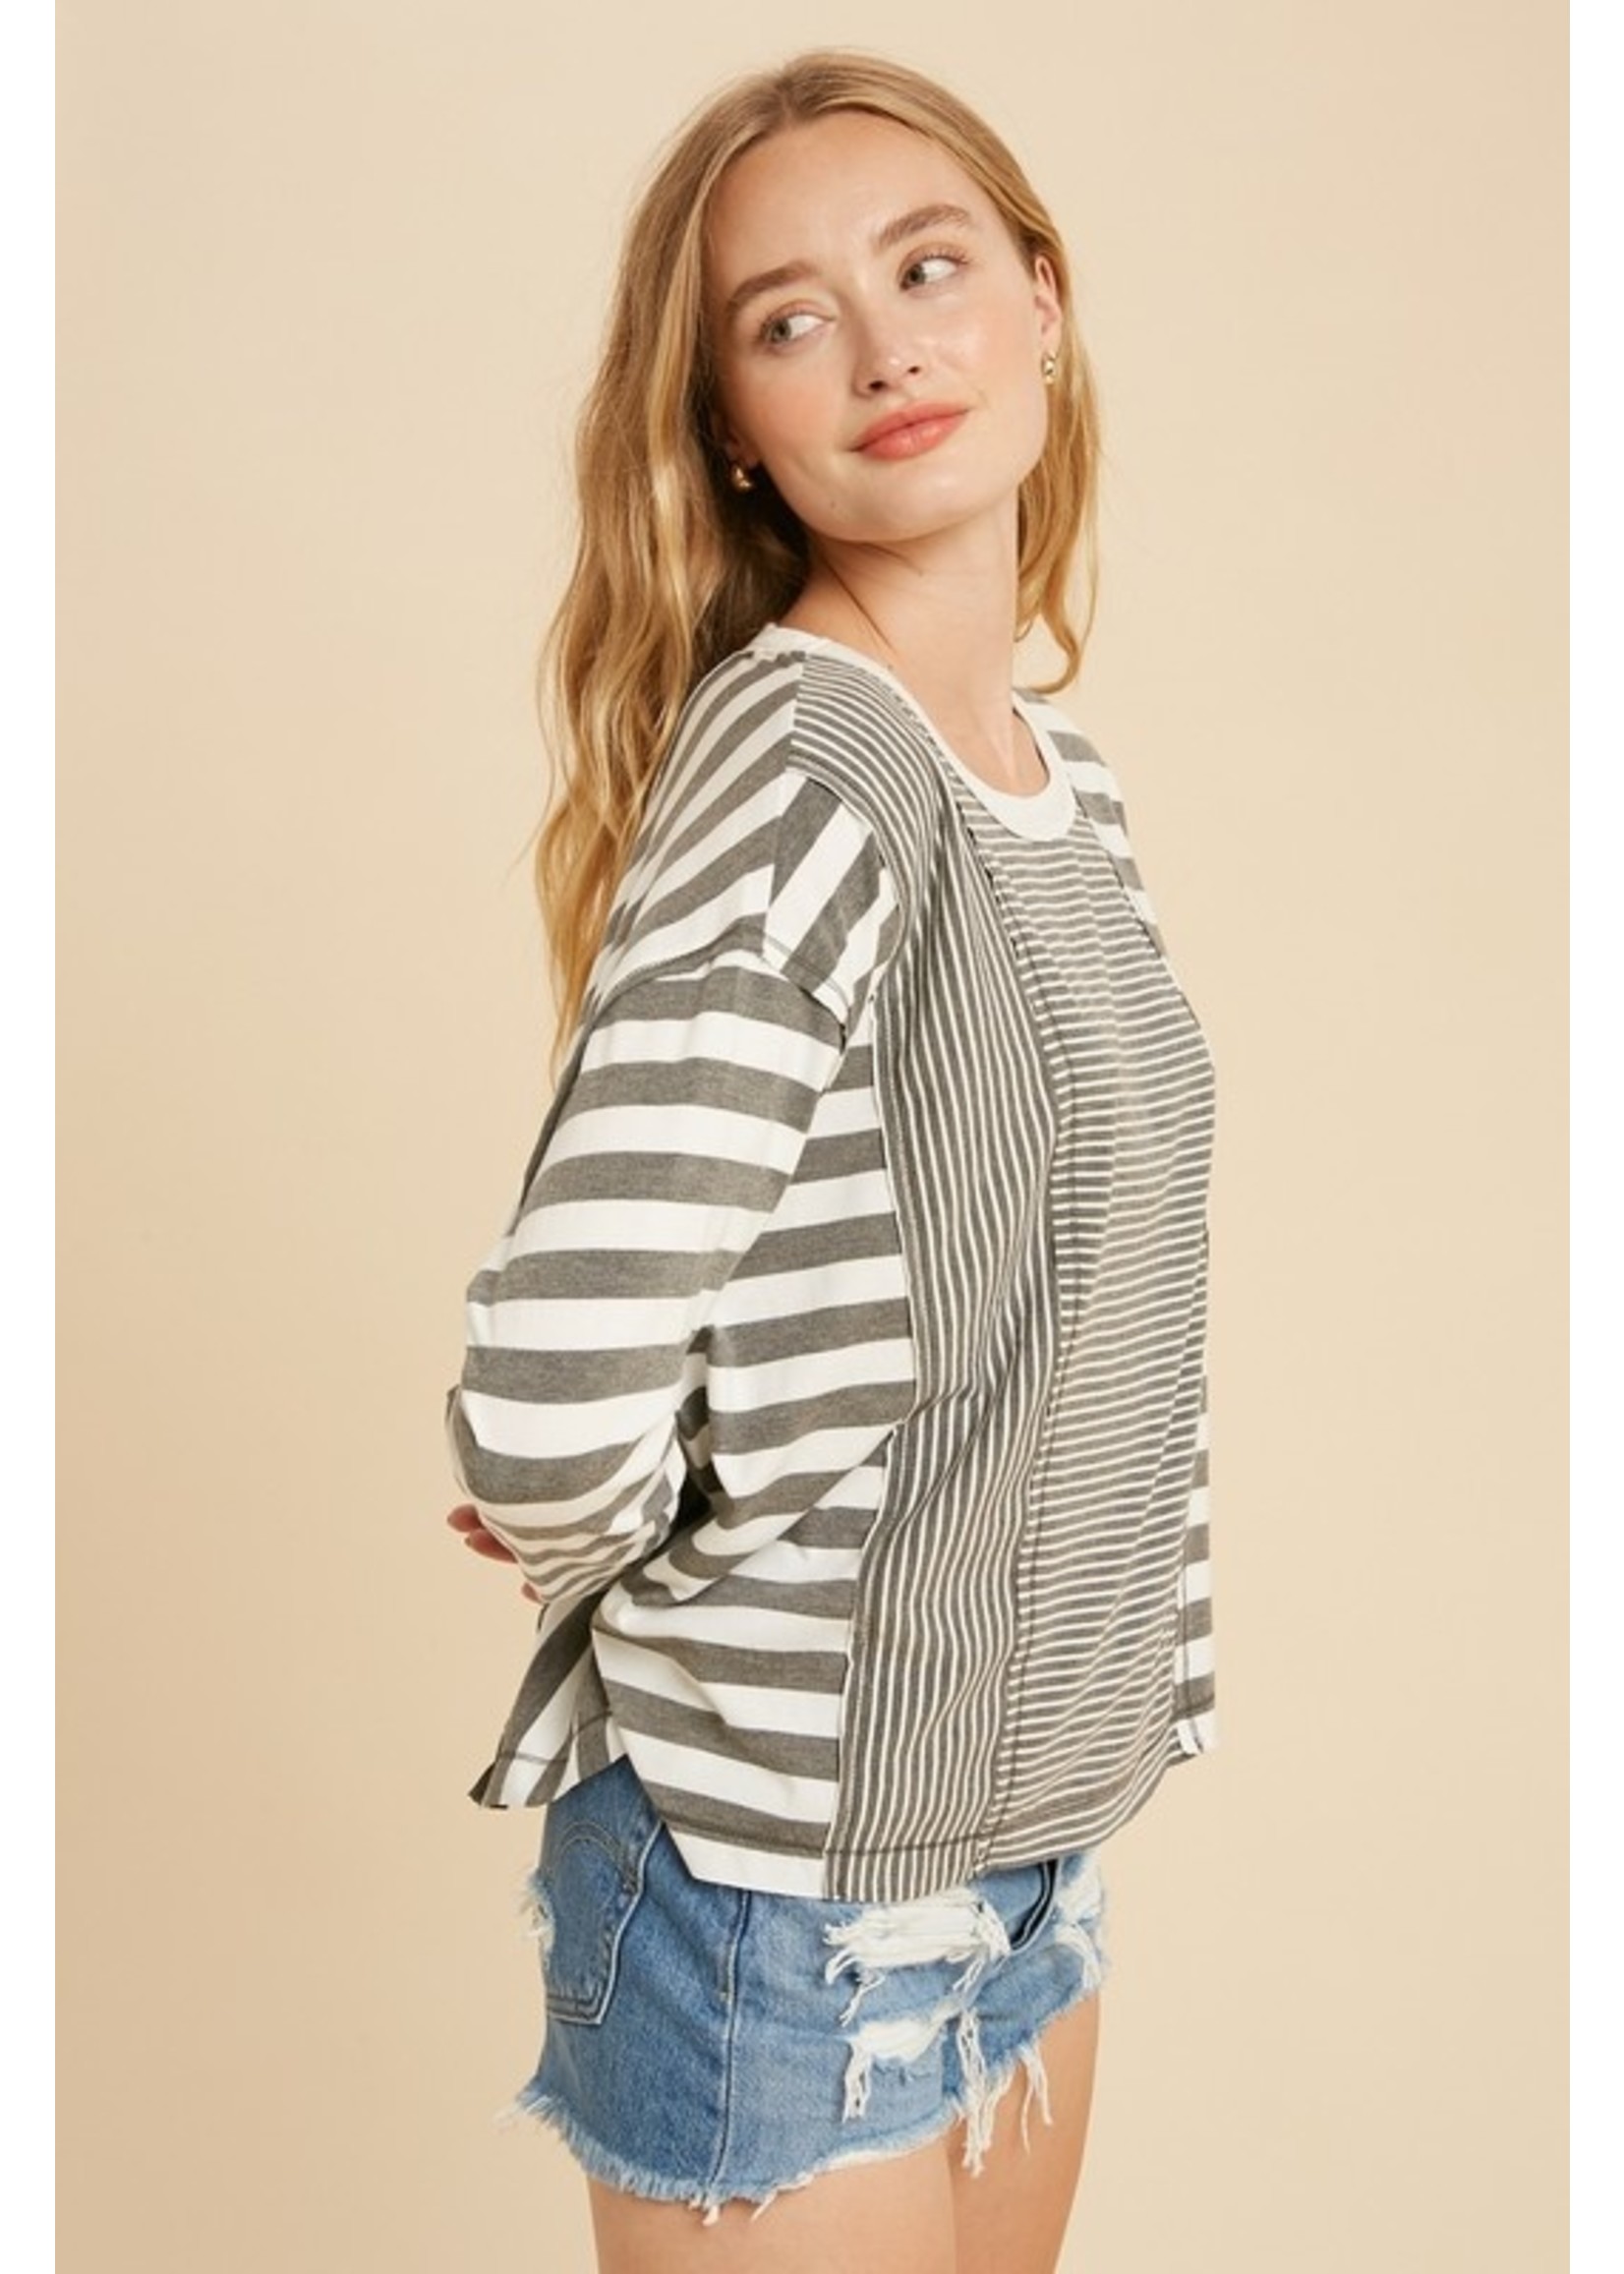 The Keep Pushing Striped Top